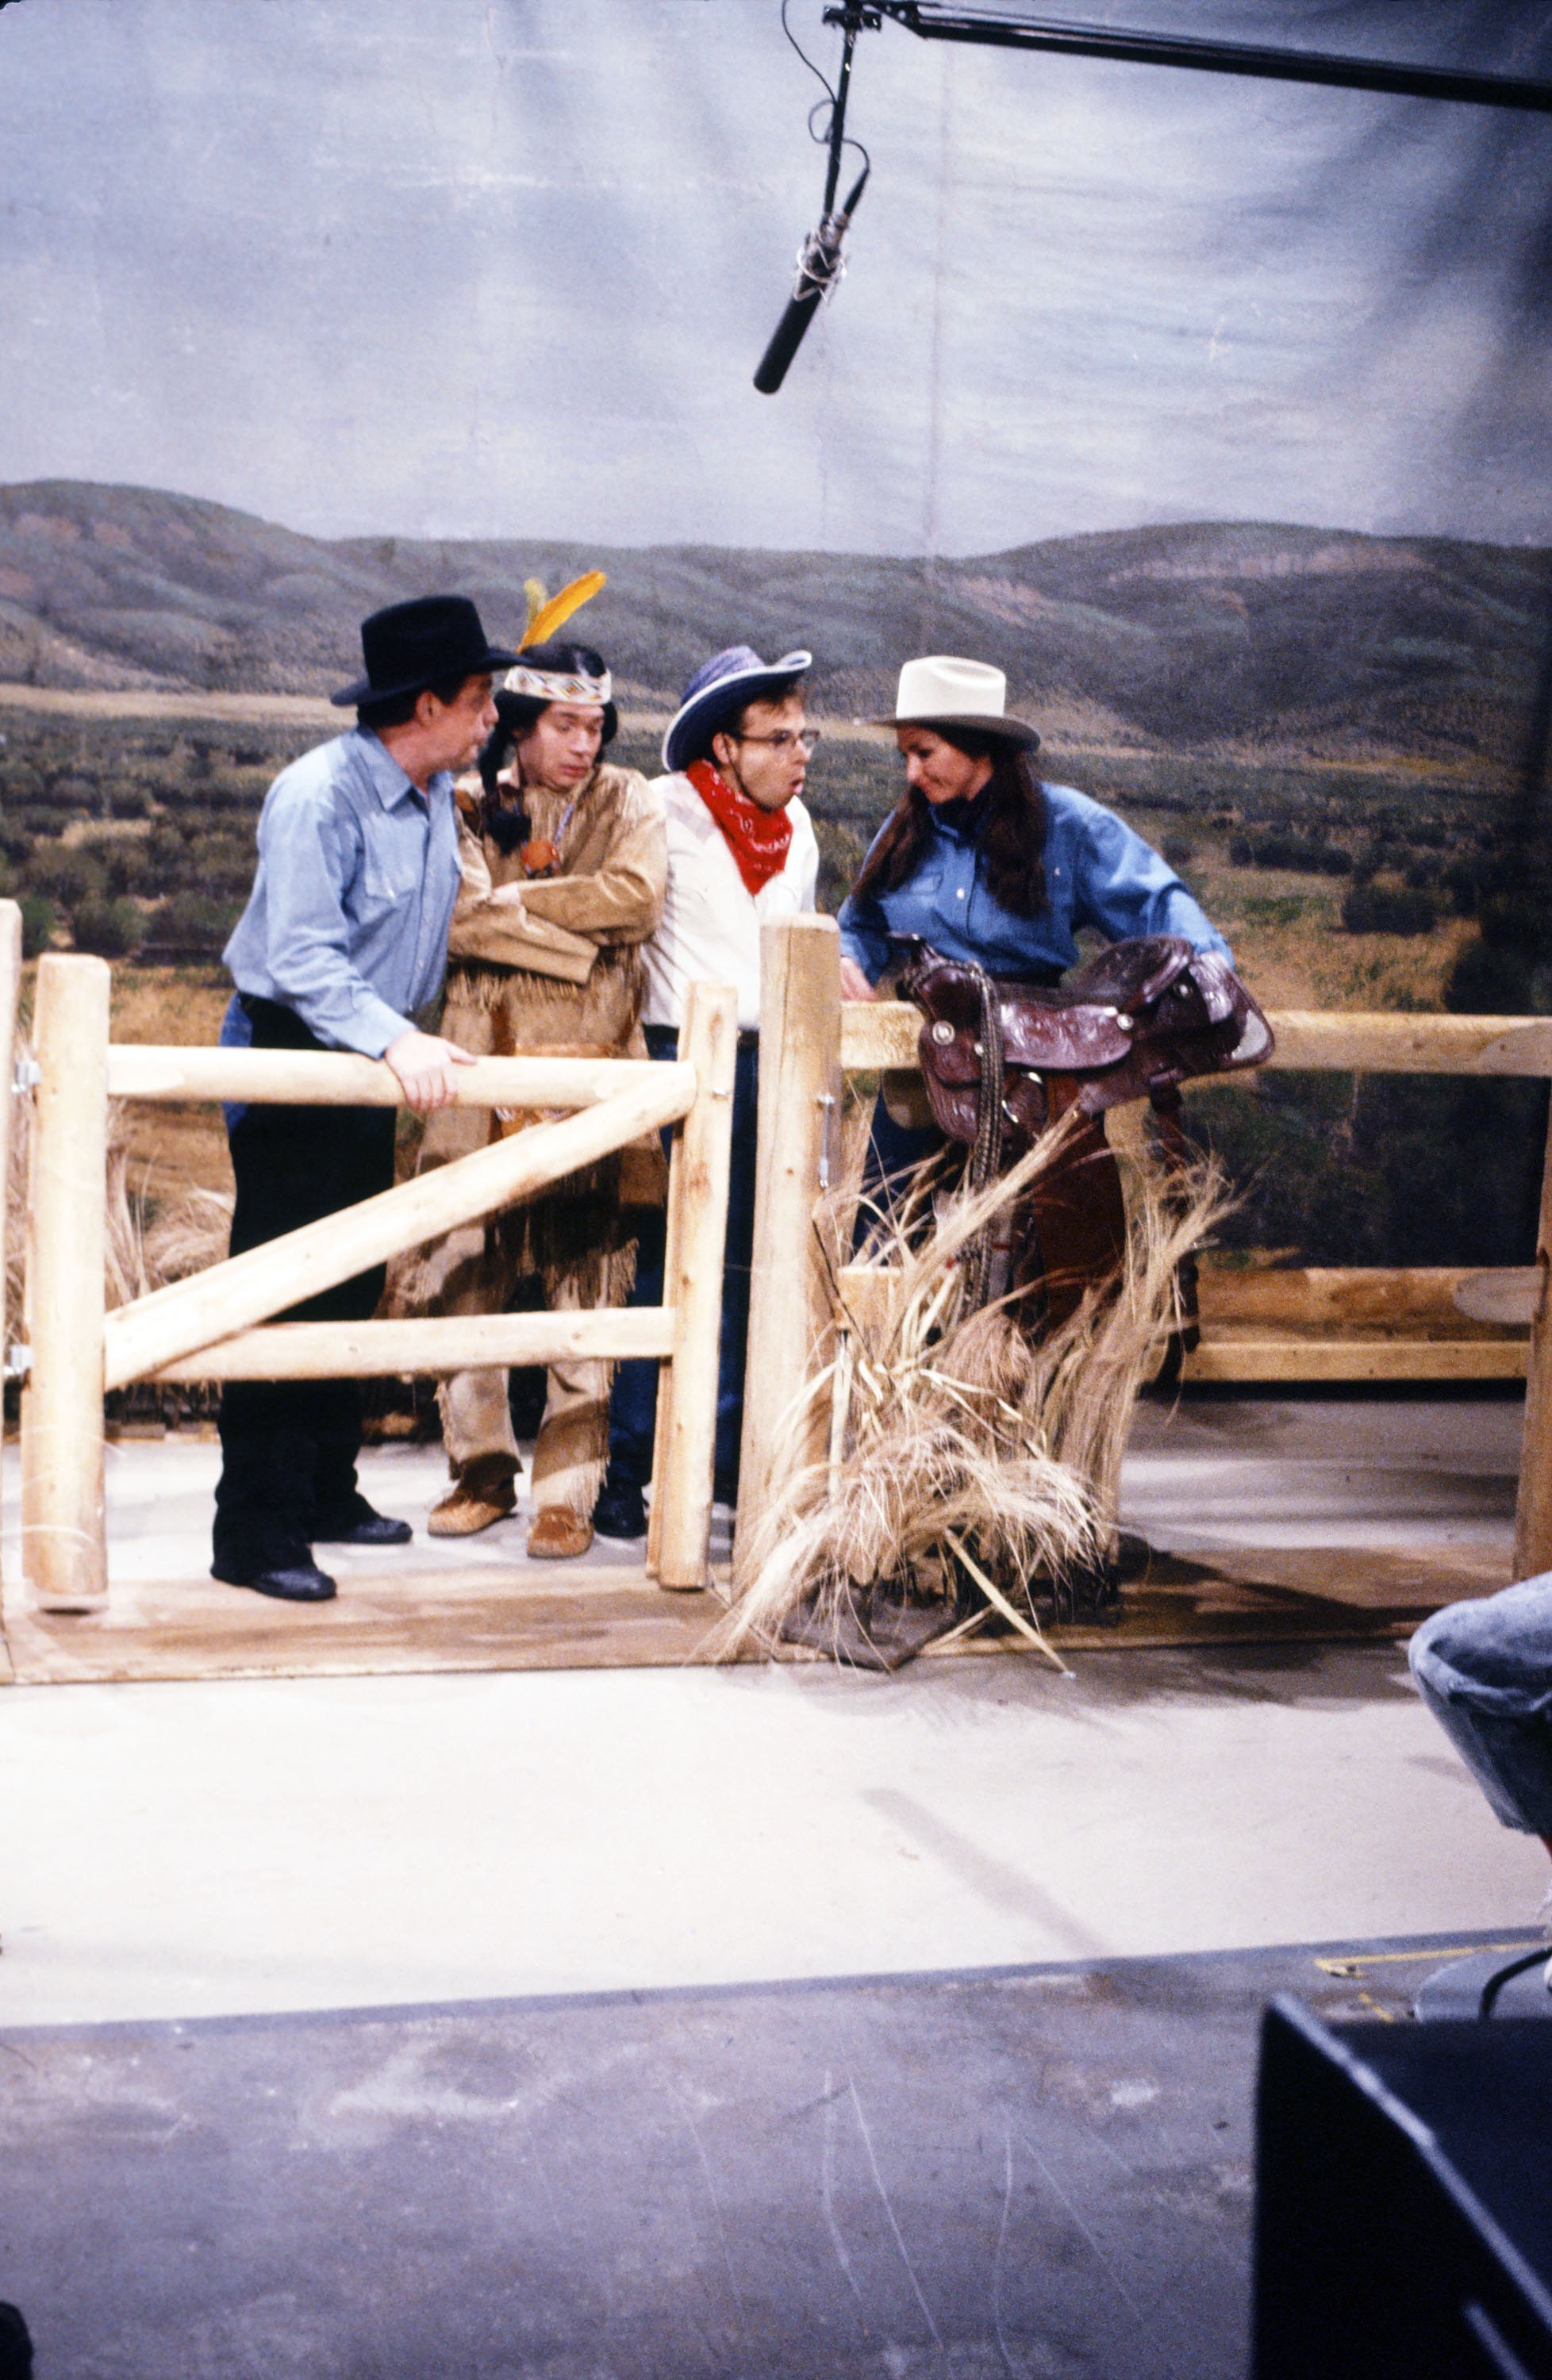 (L-R) Phil Hartman as Chet Masters, Mike Myers as Indian Boy, Rick Moranis as Jimmy, Nora Dunn as Ms. Parsons during the "Wild Horse" skit in "Saturday Night Live" on October 7, 1989. | Source: Getty Images